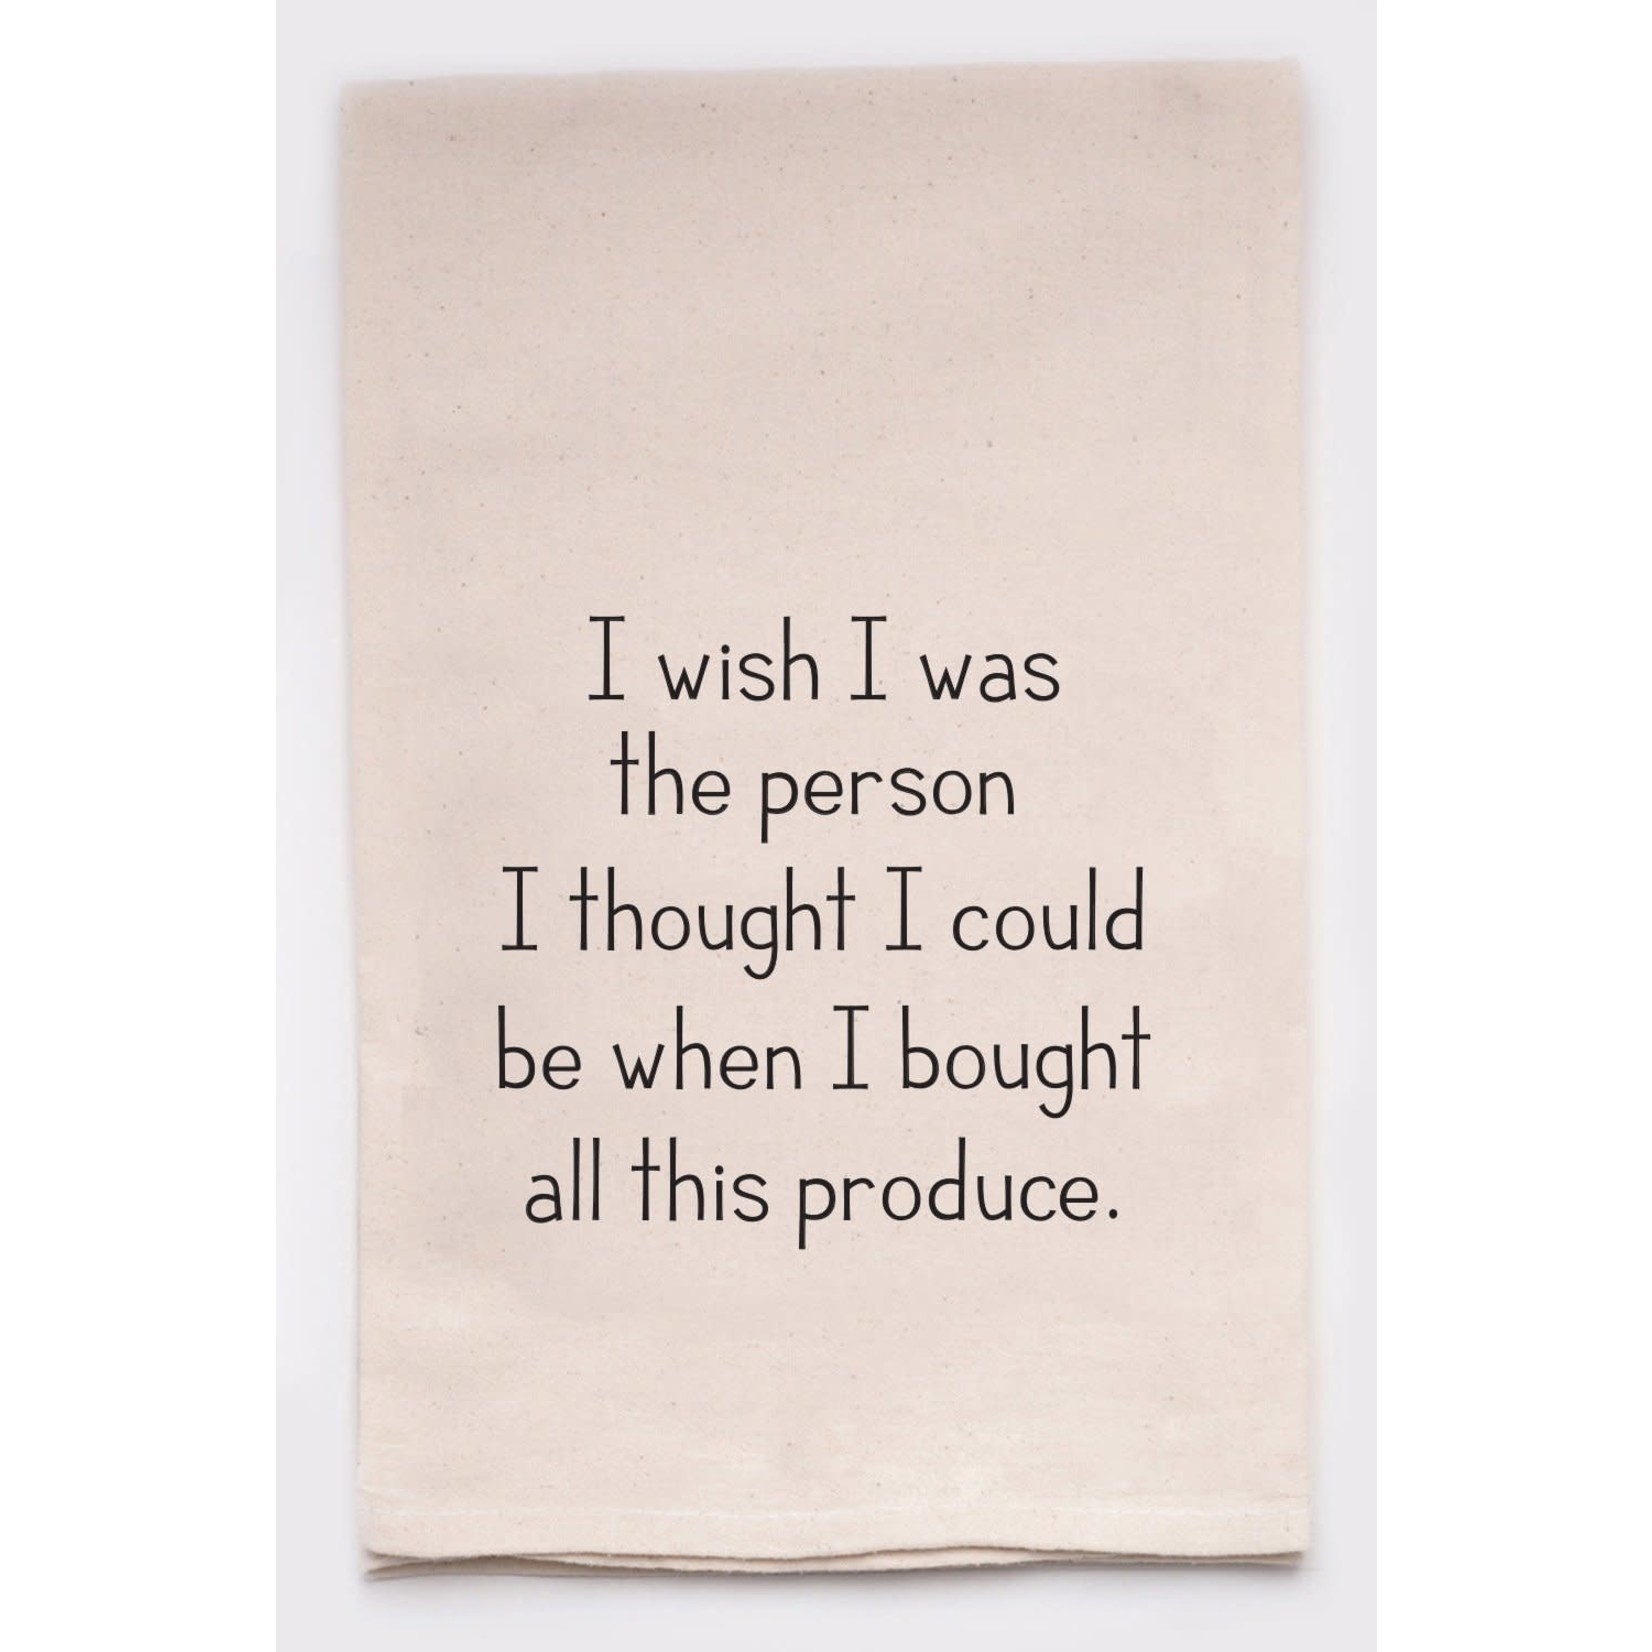 ellembee gift I Wish I Was the Person - Produce  Kitchen Tea Towel